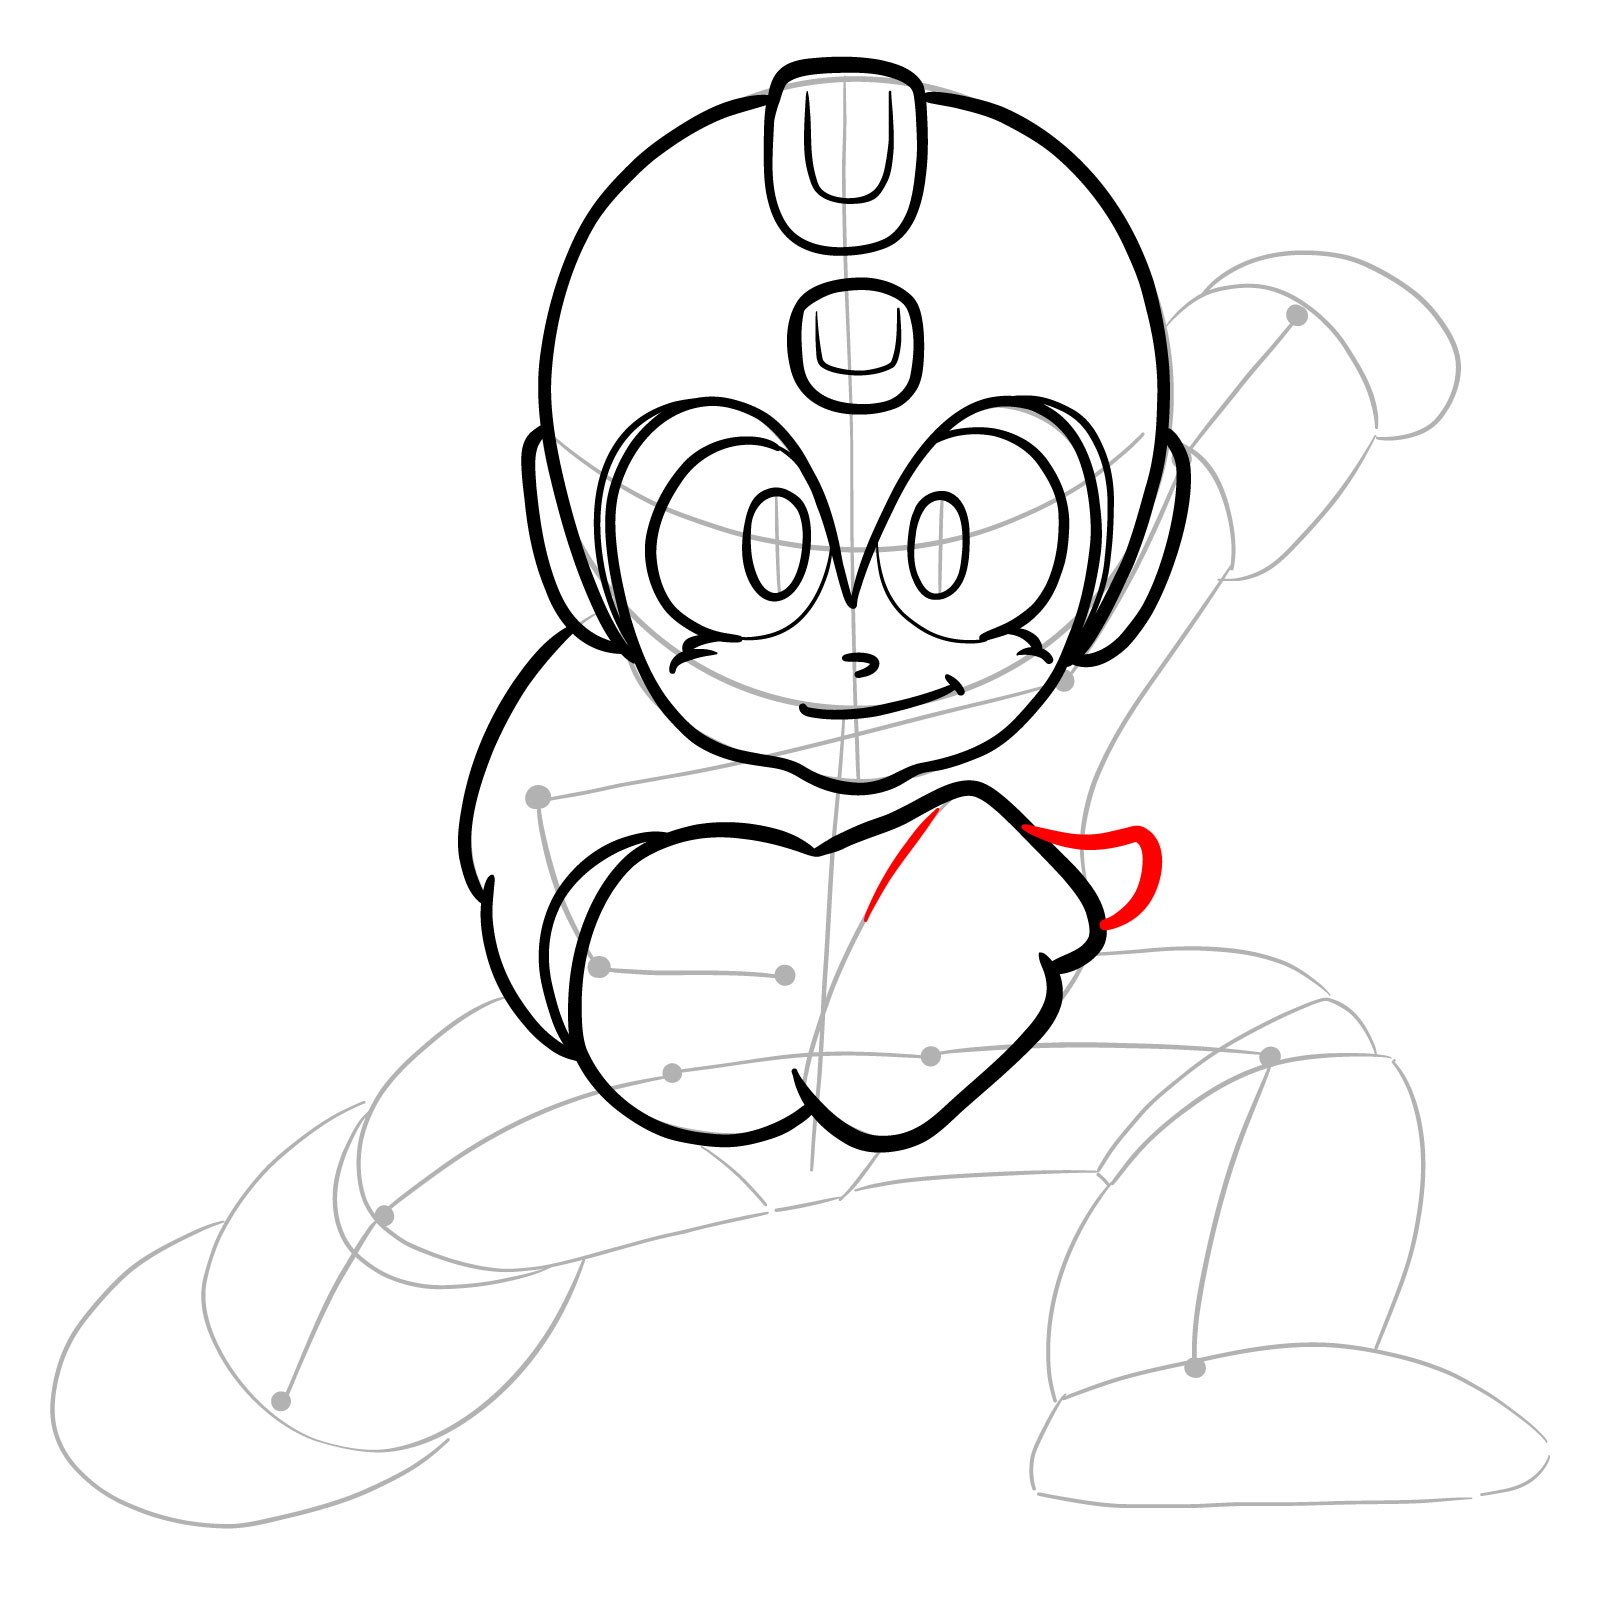 How to draw Mega Man from the original game - step 14